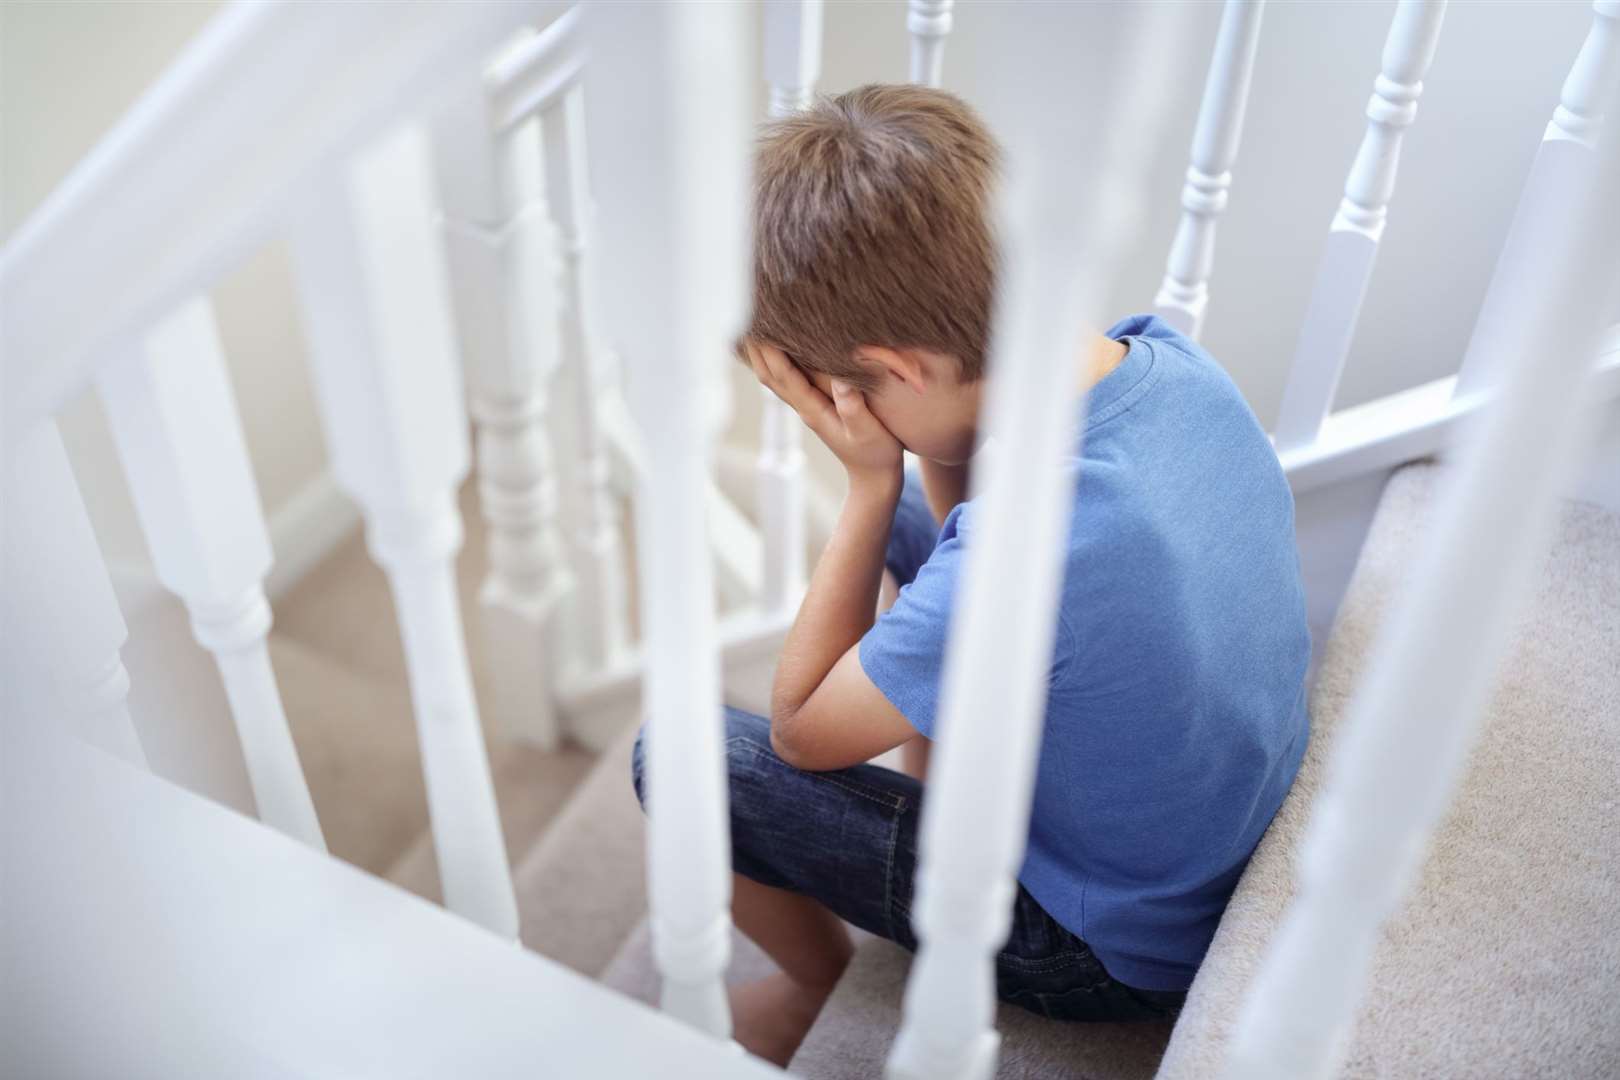 Children are struggling with everything that's going on.Photo: Getty Images/iStockphoto, BrianAJackson